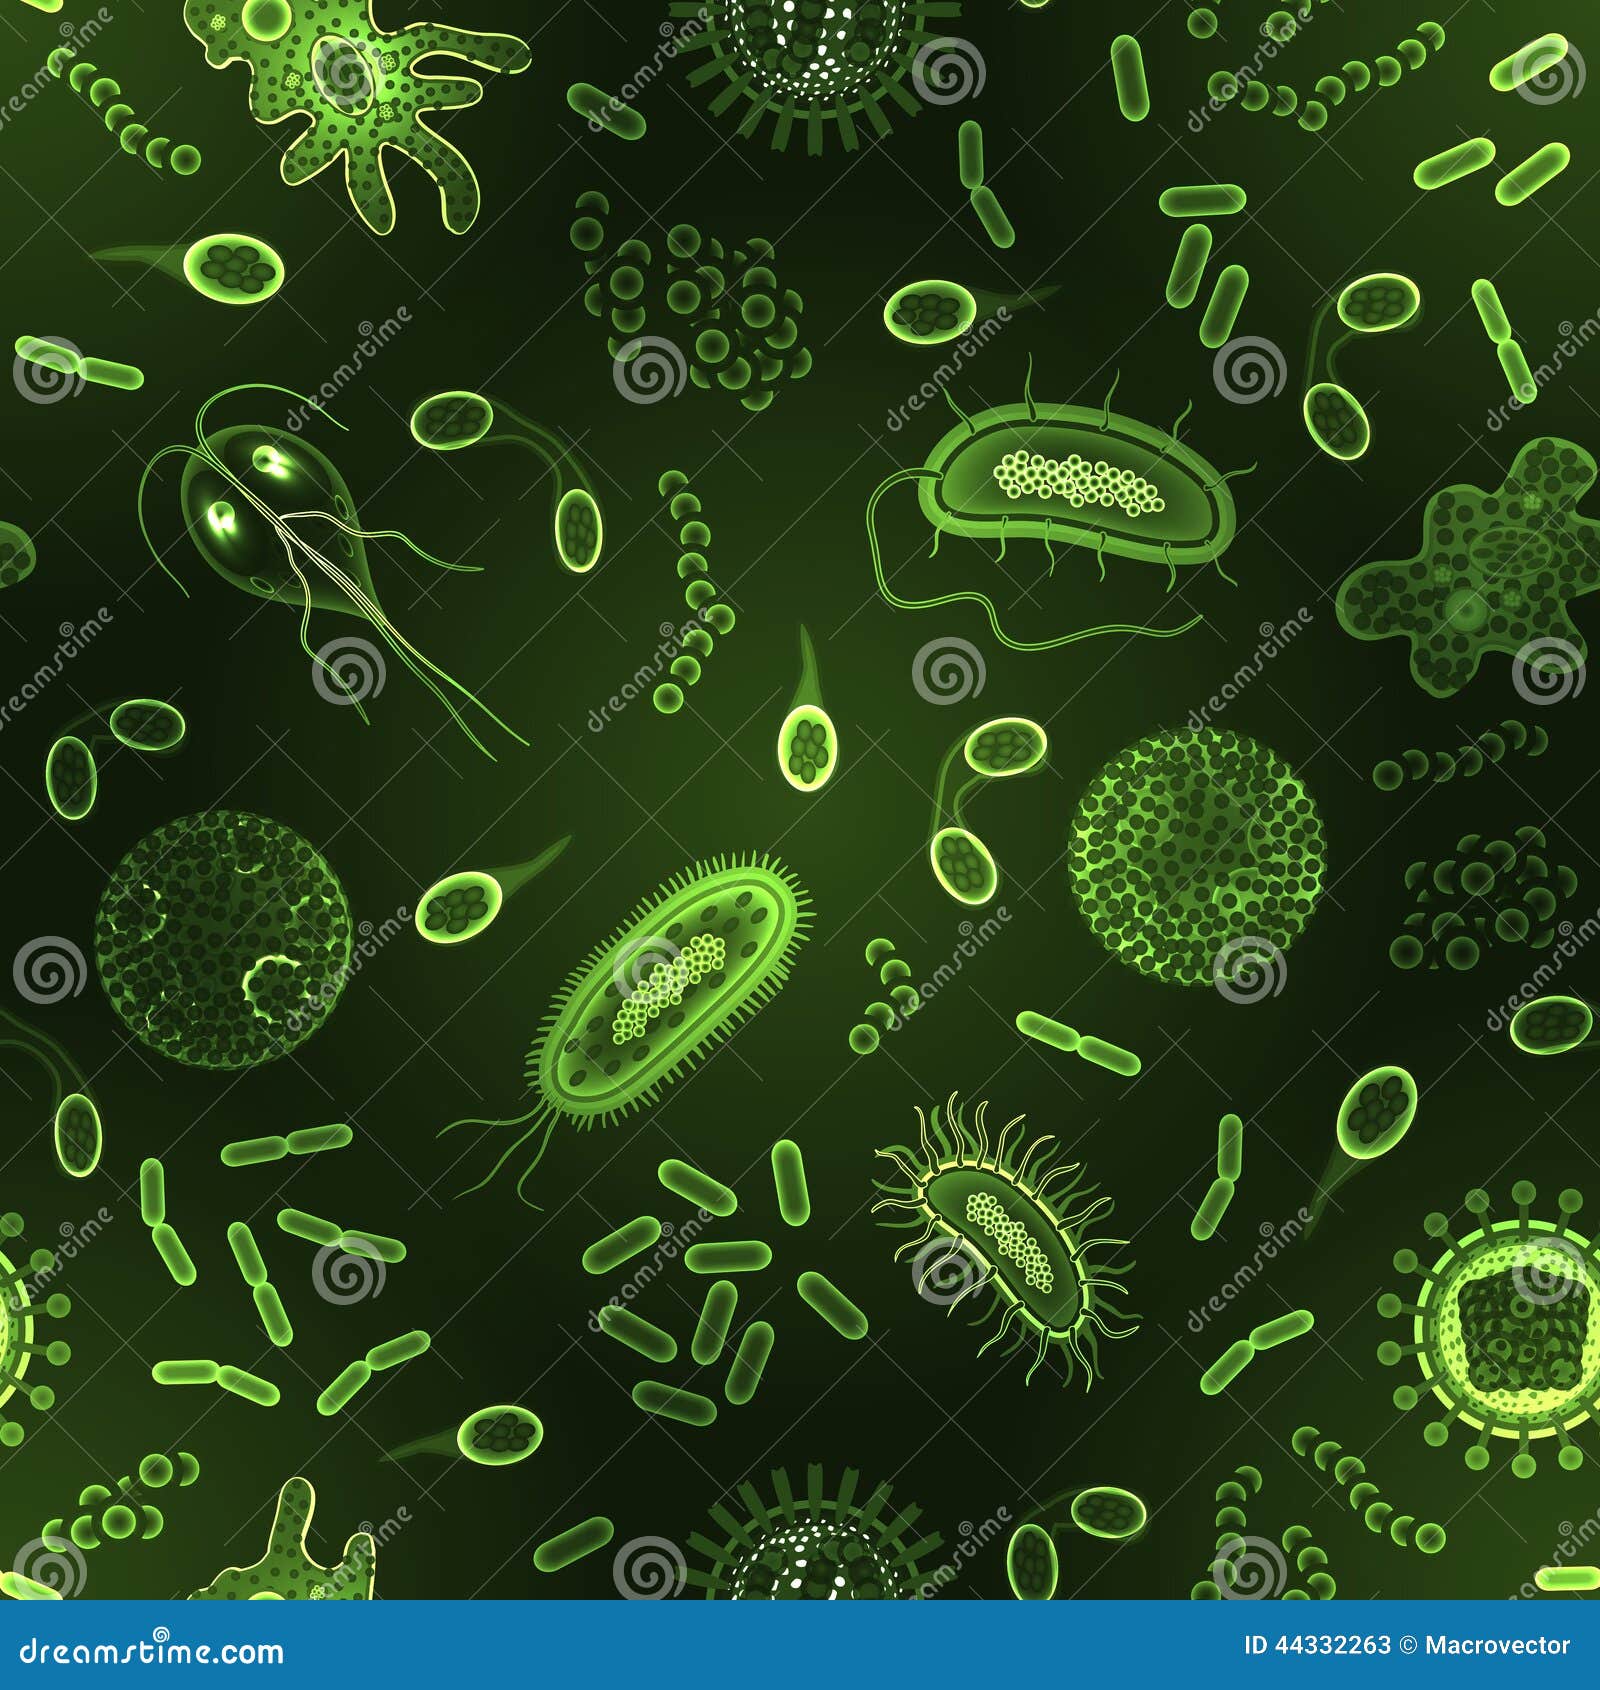 bacteria and virus seamless pattern inversion